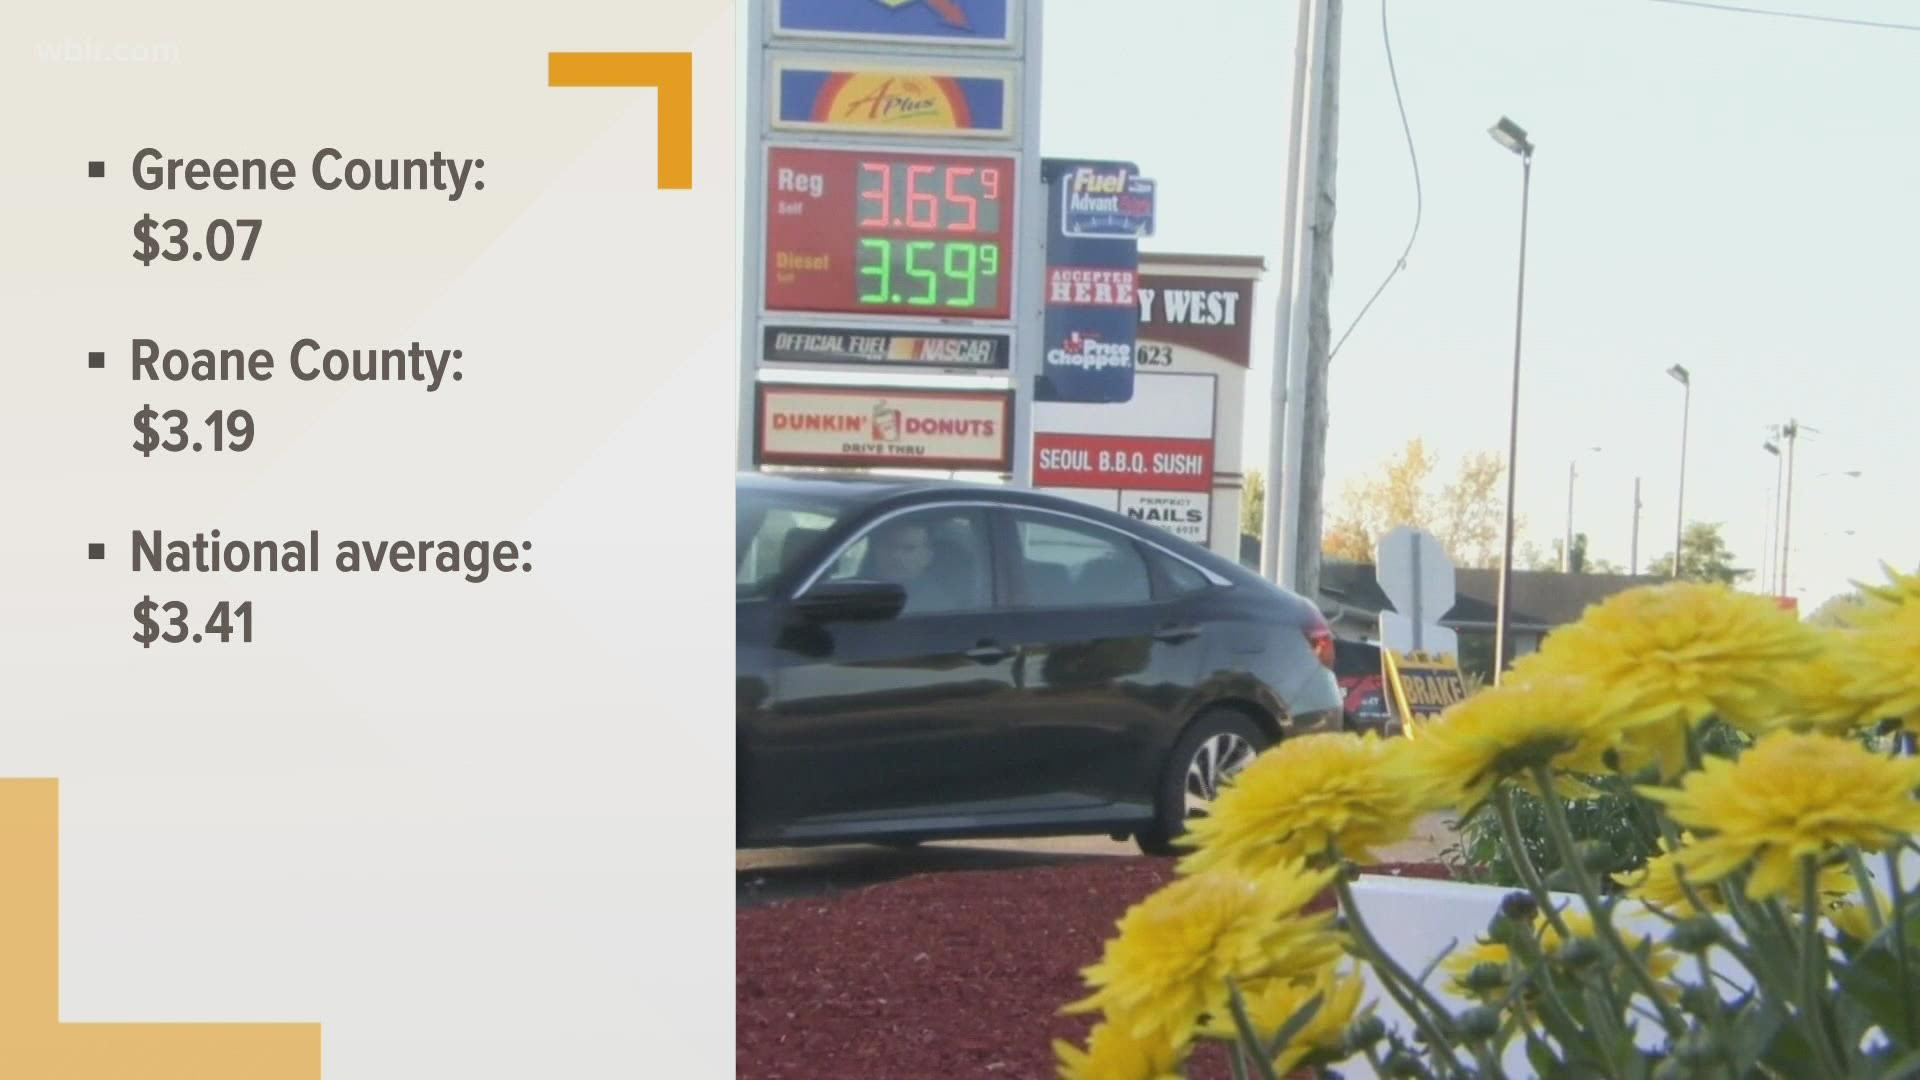 In East Tennessee, you can find the cheapest gas in Greene county.